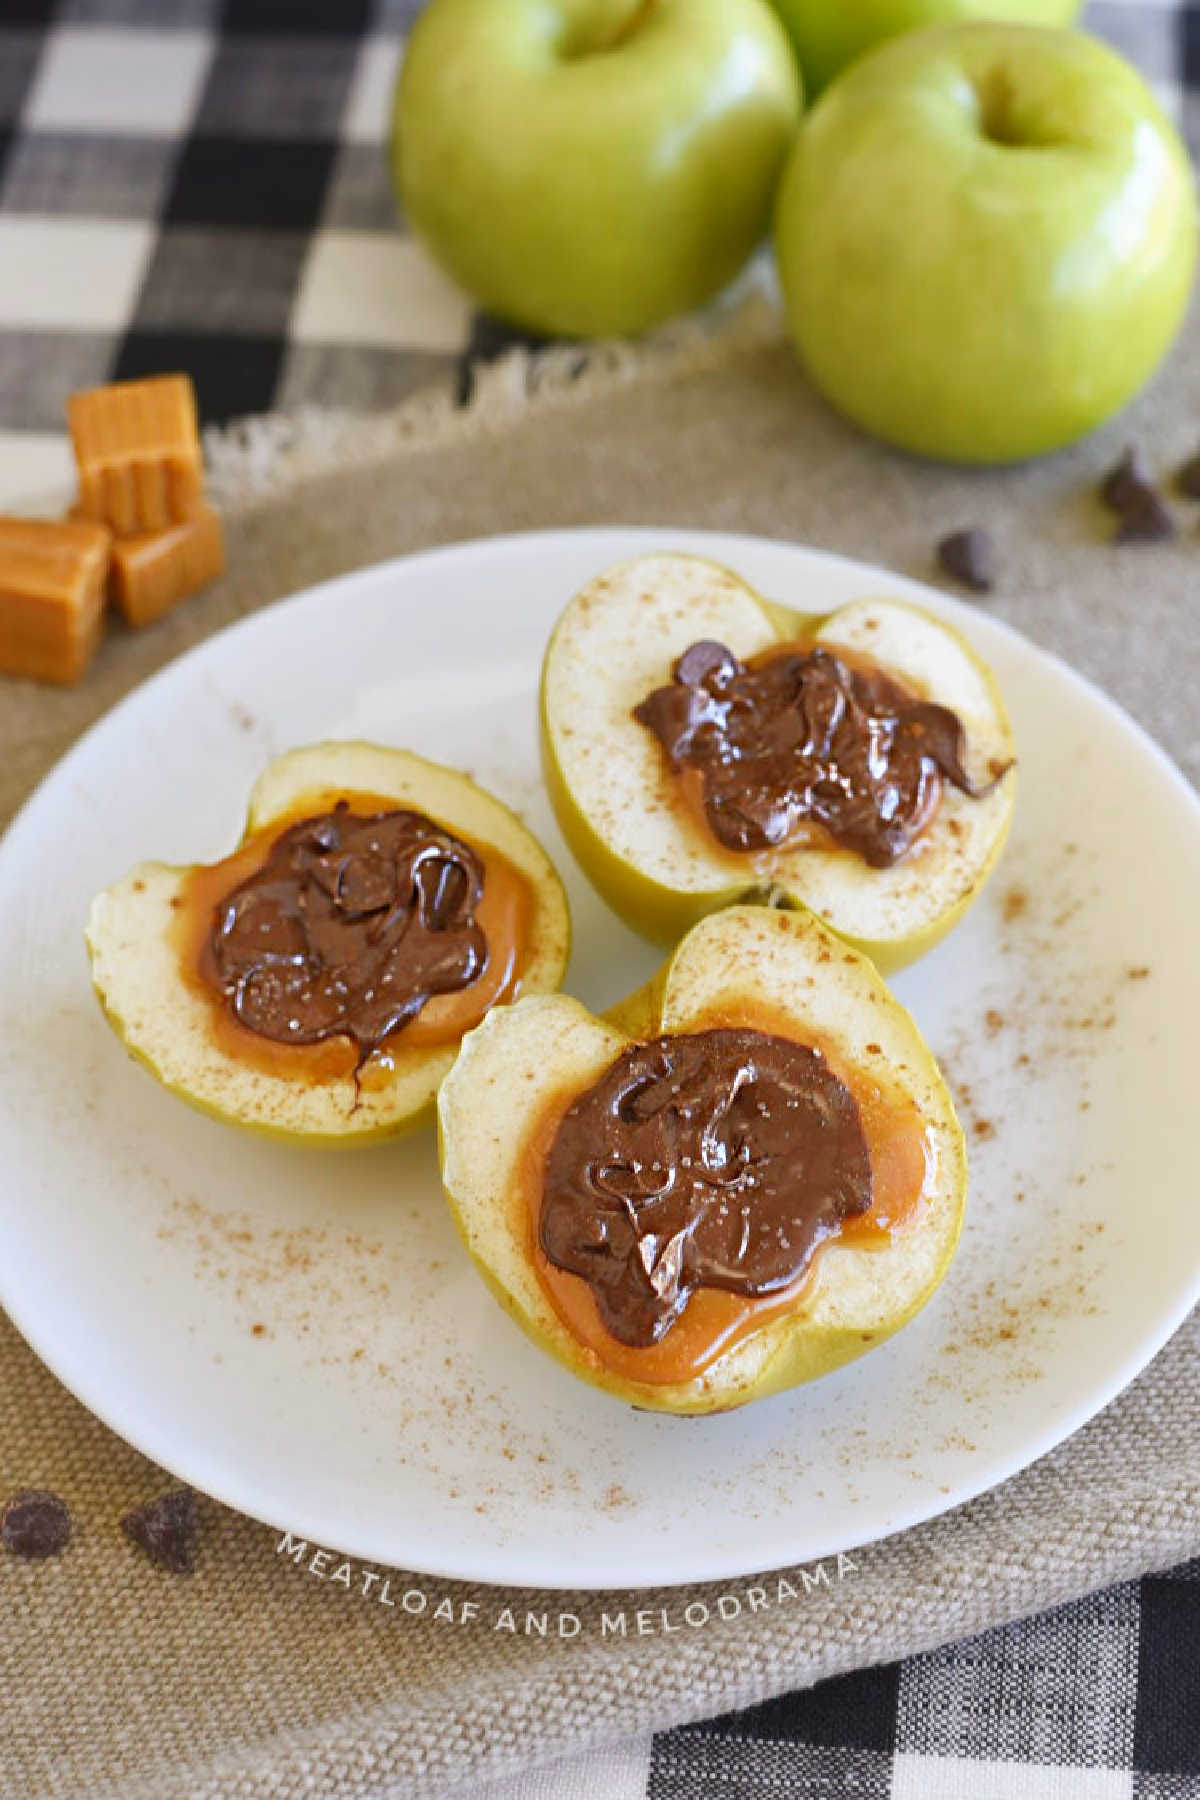 baked apples stuffed with caramel and melted chocolate on plate